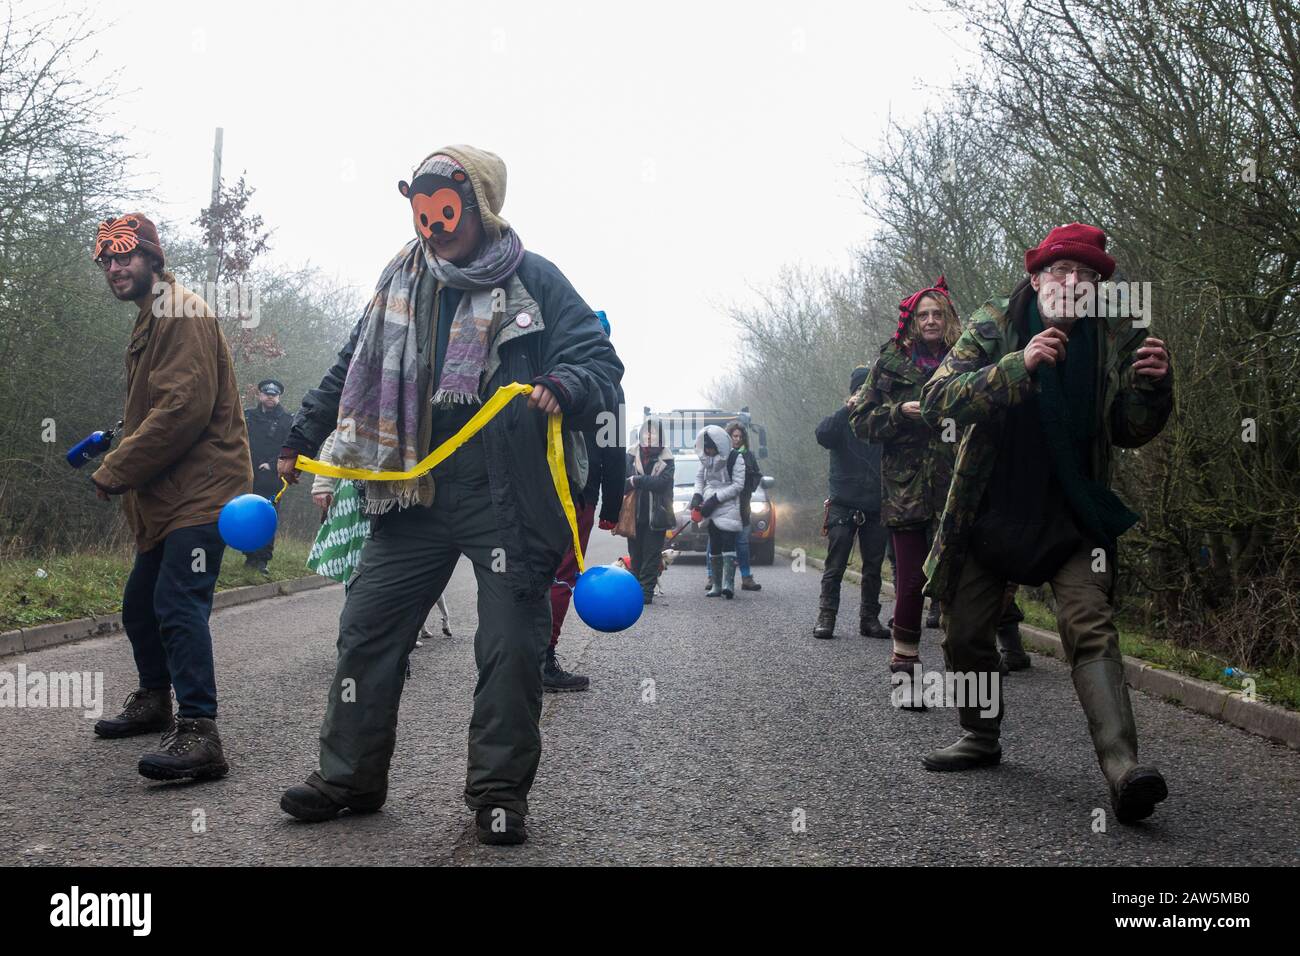 Denham, UK. 6 February, 2020. Environmental activists from Save the Colne Valley, Stop HS2 and Extinction Rebellion walk at a snail’s pace along a road so as to block for several hours a security vehicle and truck delivering fencing and other supplies to be used for works associated with the HS2 high-speed rail link close to the river Colne at Denham Ford. Works planned in the immediate vicinity include the felling of trees and the construction of a Bailey bridge, compounds and fencing, some of which in a wetland nature reserve forming part of a Site of Metropolitan Importance for Nature Conse Stock Photo